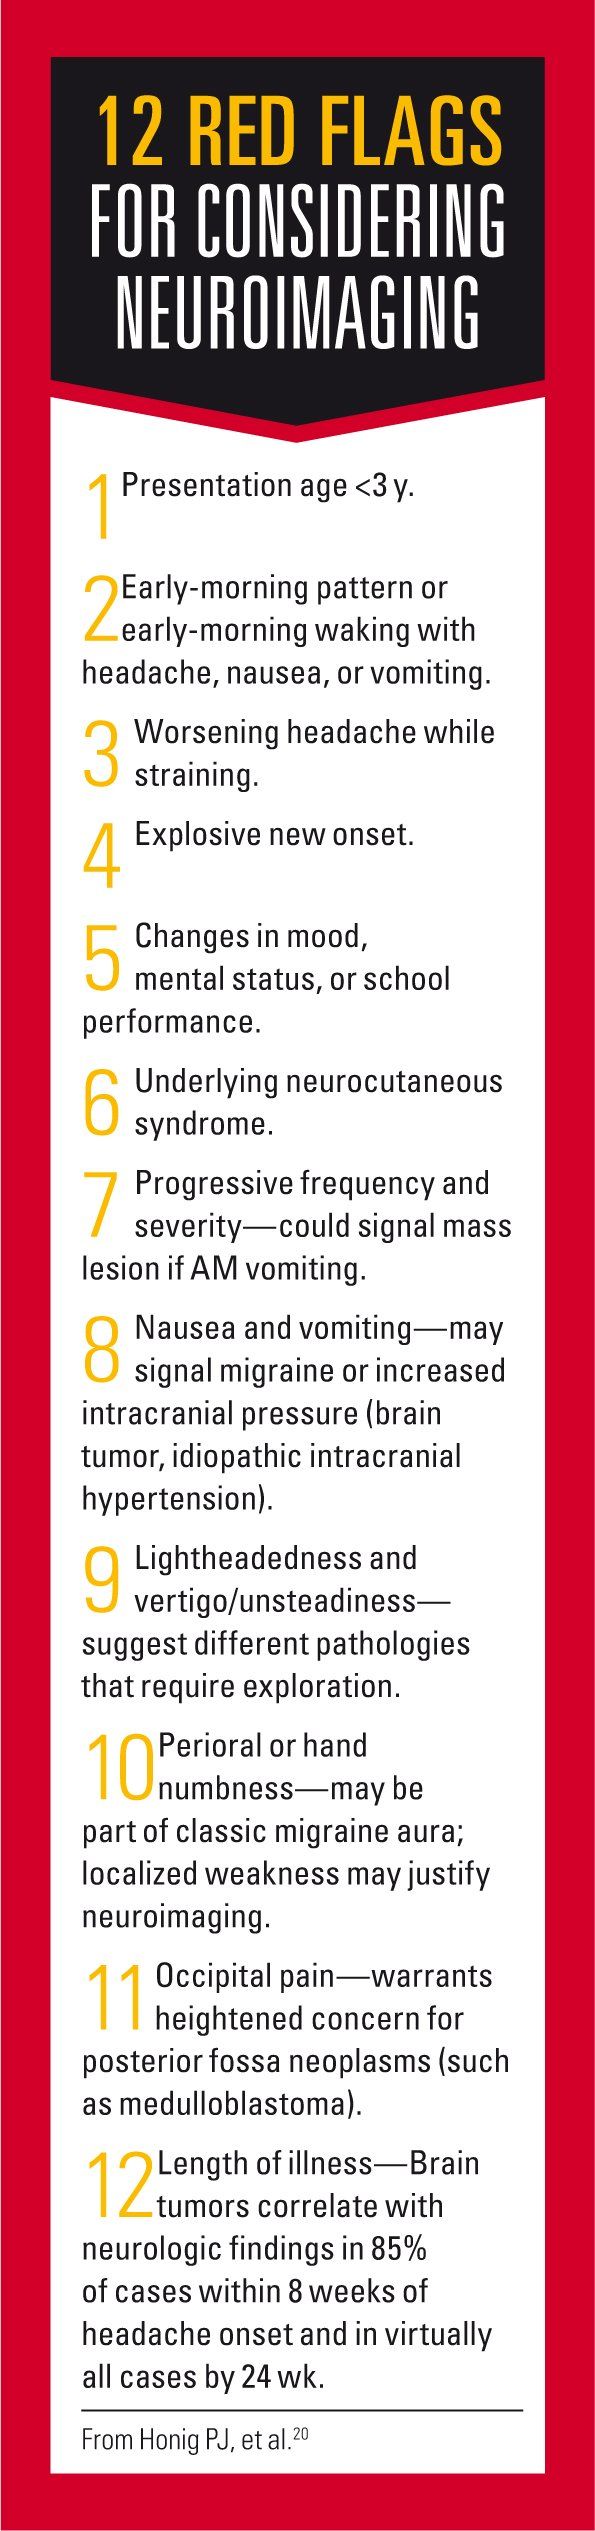 12 red flags for considering neuroimaging